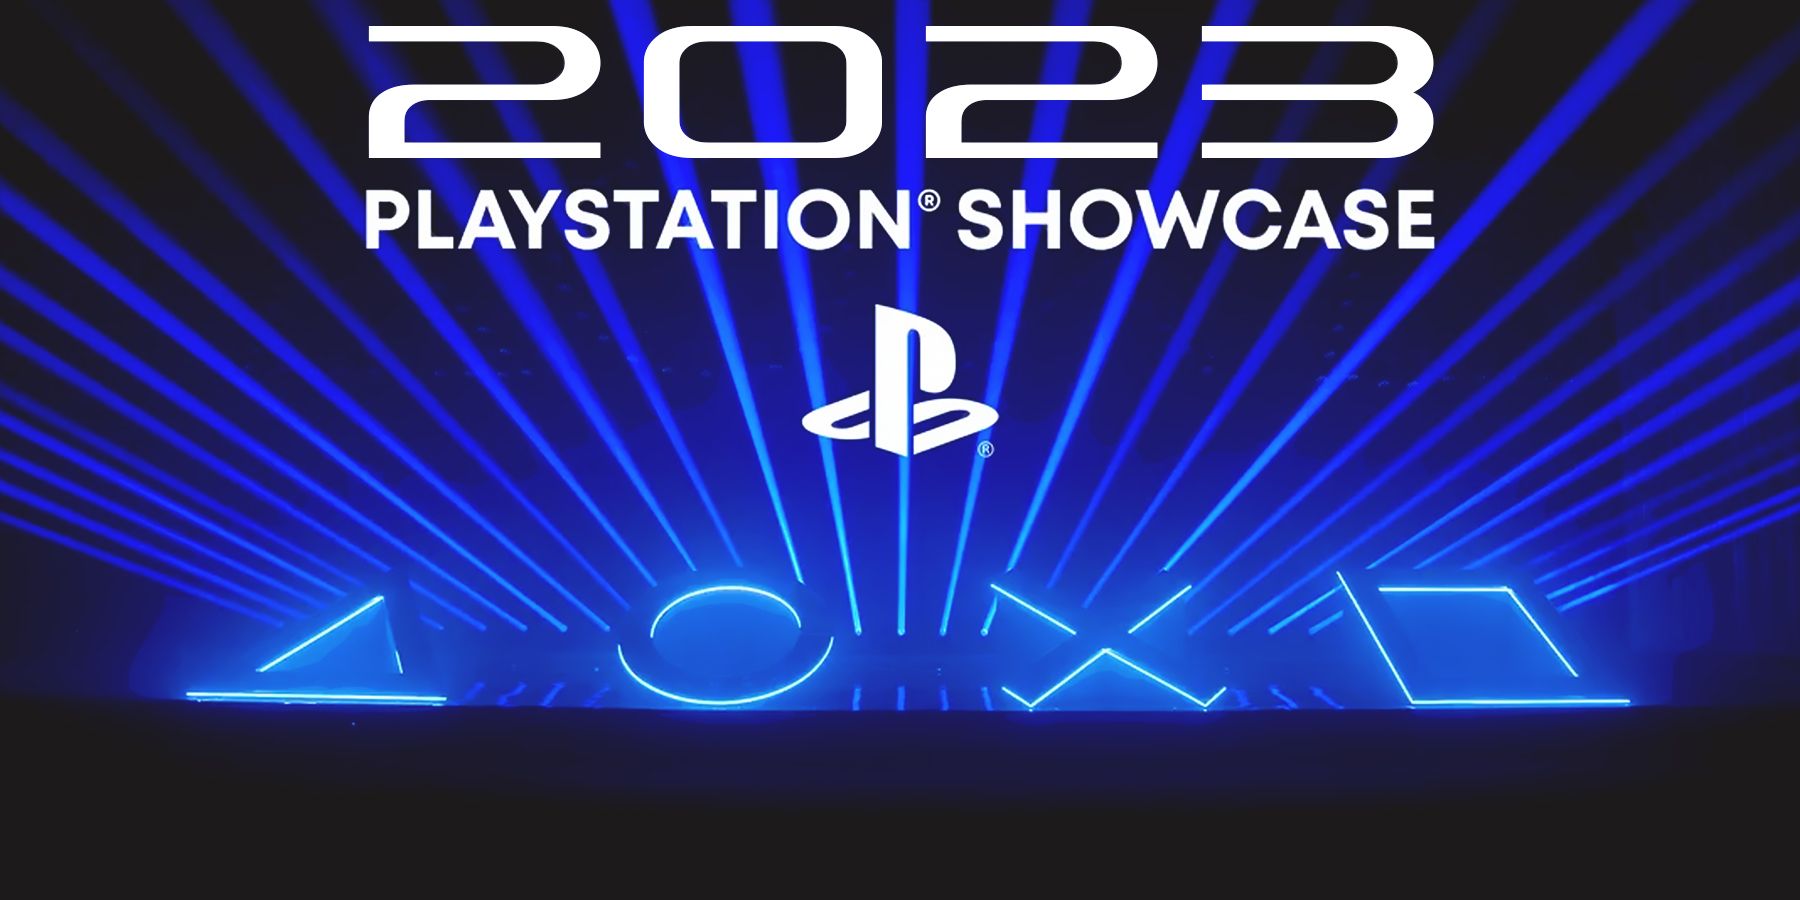 Rumor Second PlayStation Showcase Planned for 2023